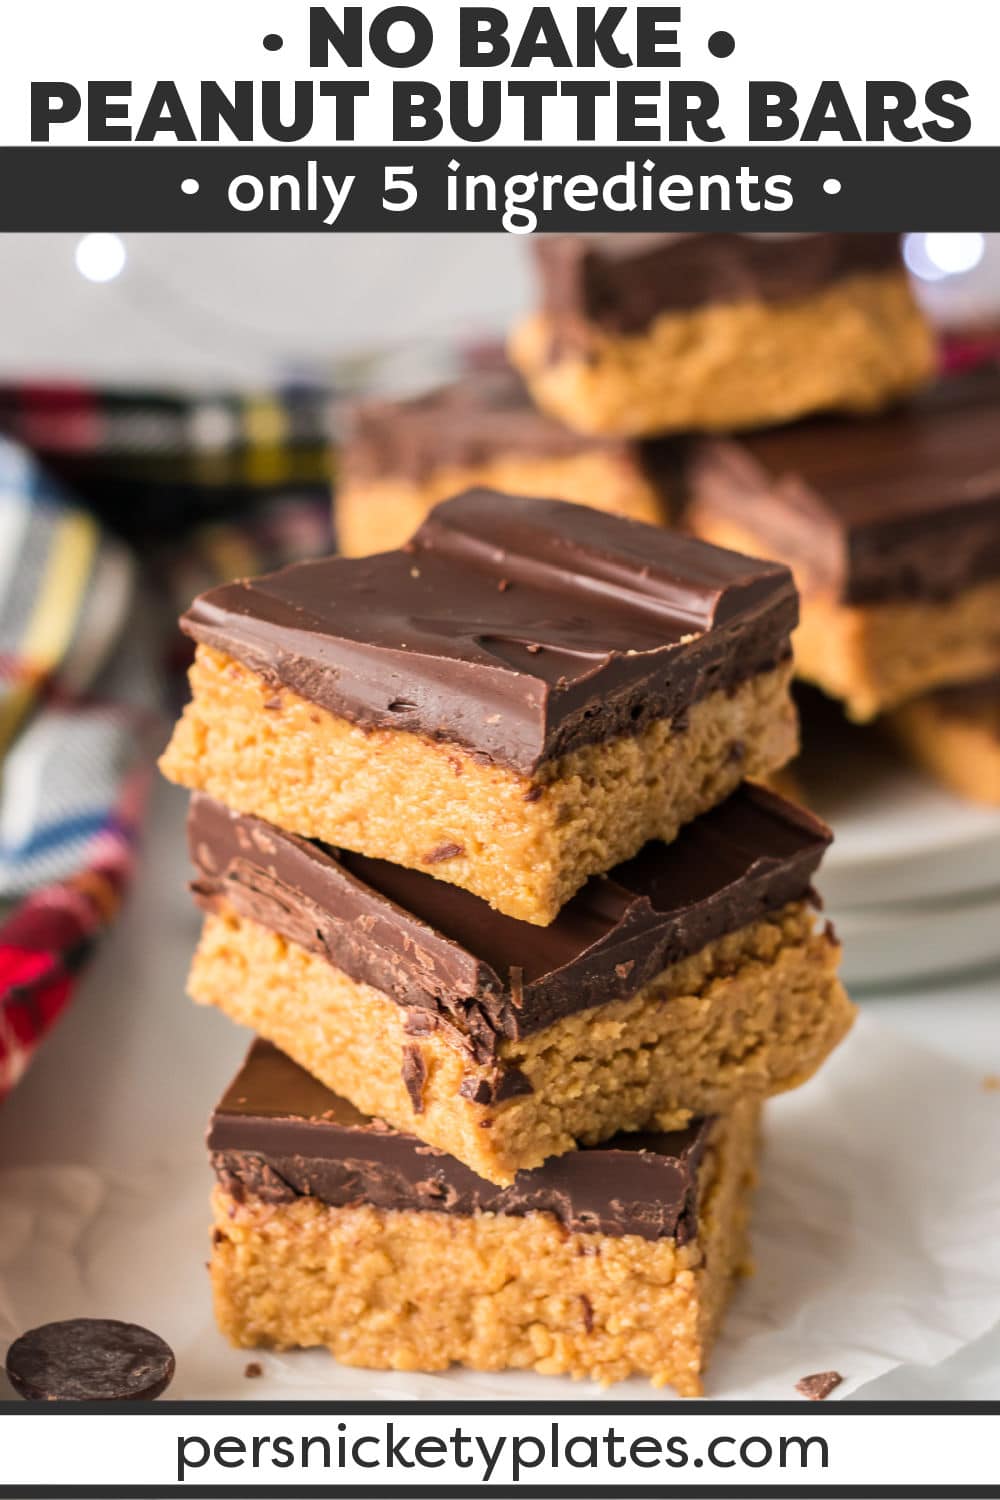 These no bake chocolate peanut butter bars have all the flavors of peanut butter cups in the form of a dessert bar made with just 5 ingredients! With no oven required, these rich and decadent dessert bars come together quickly and easily for the tastiest anytime treat. | www.persnicketyplates.com